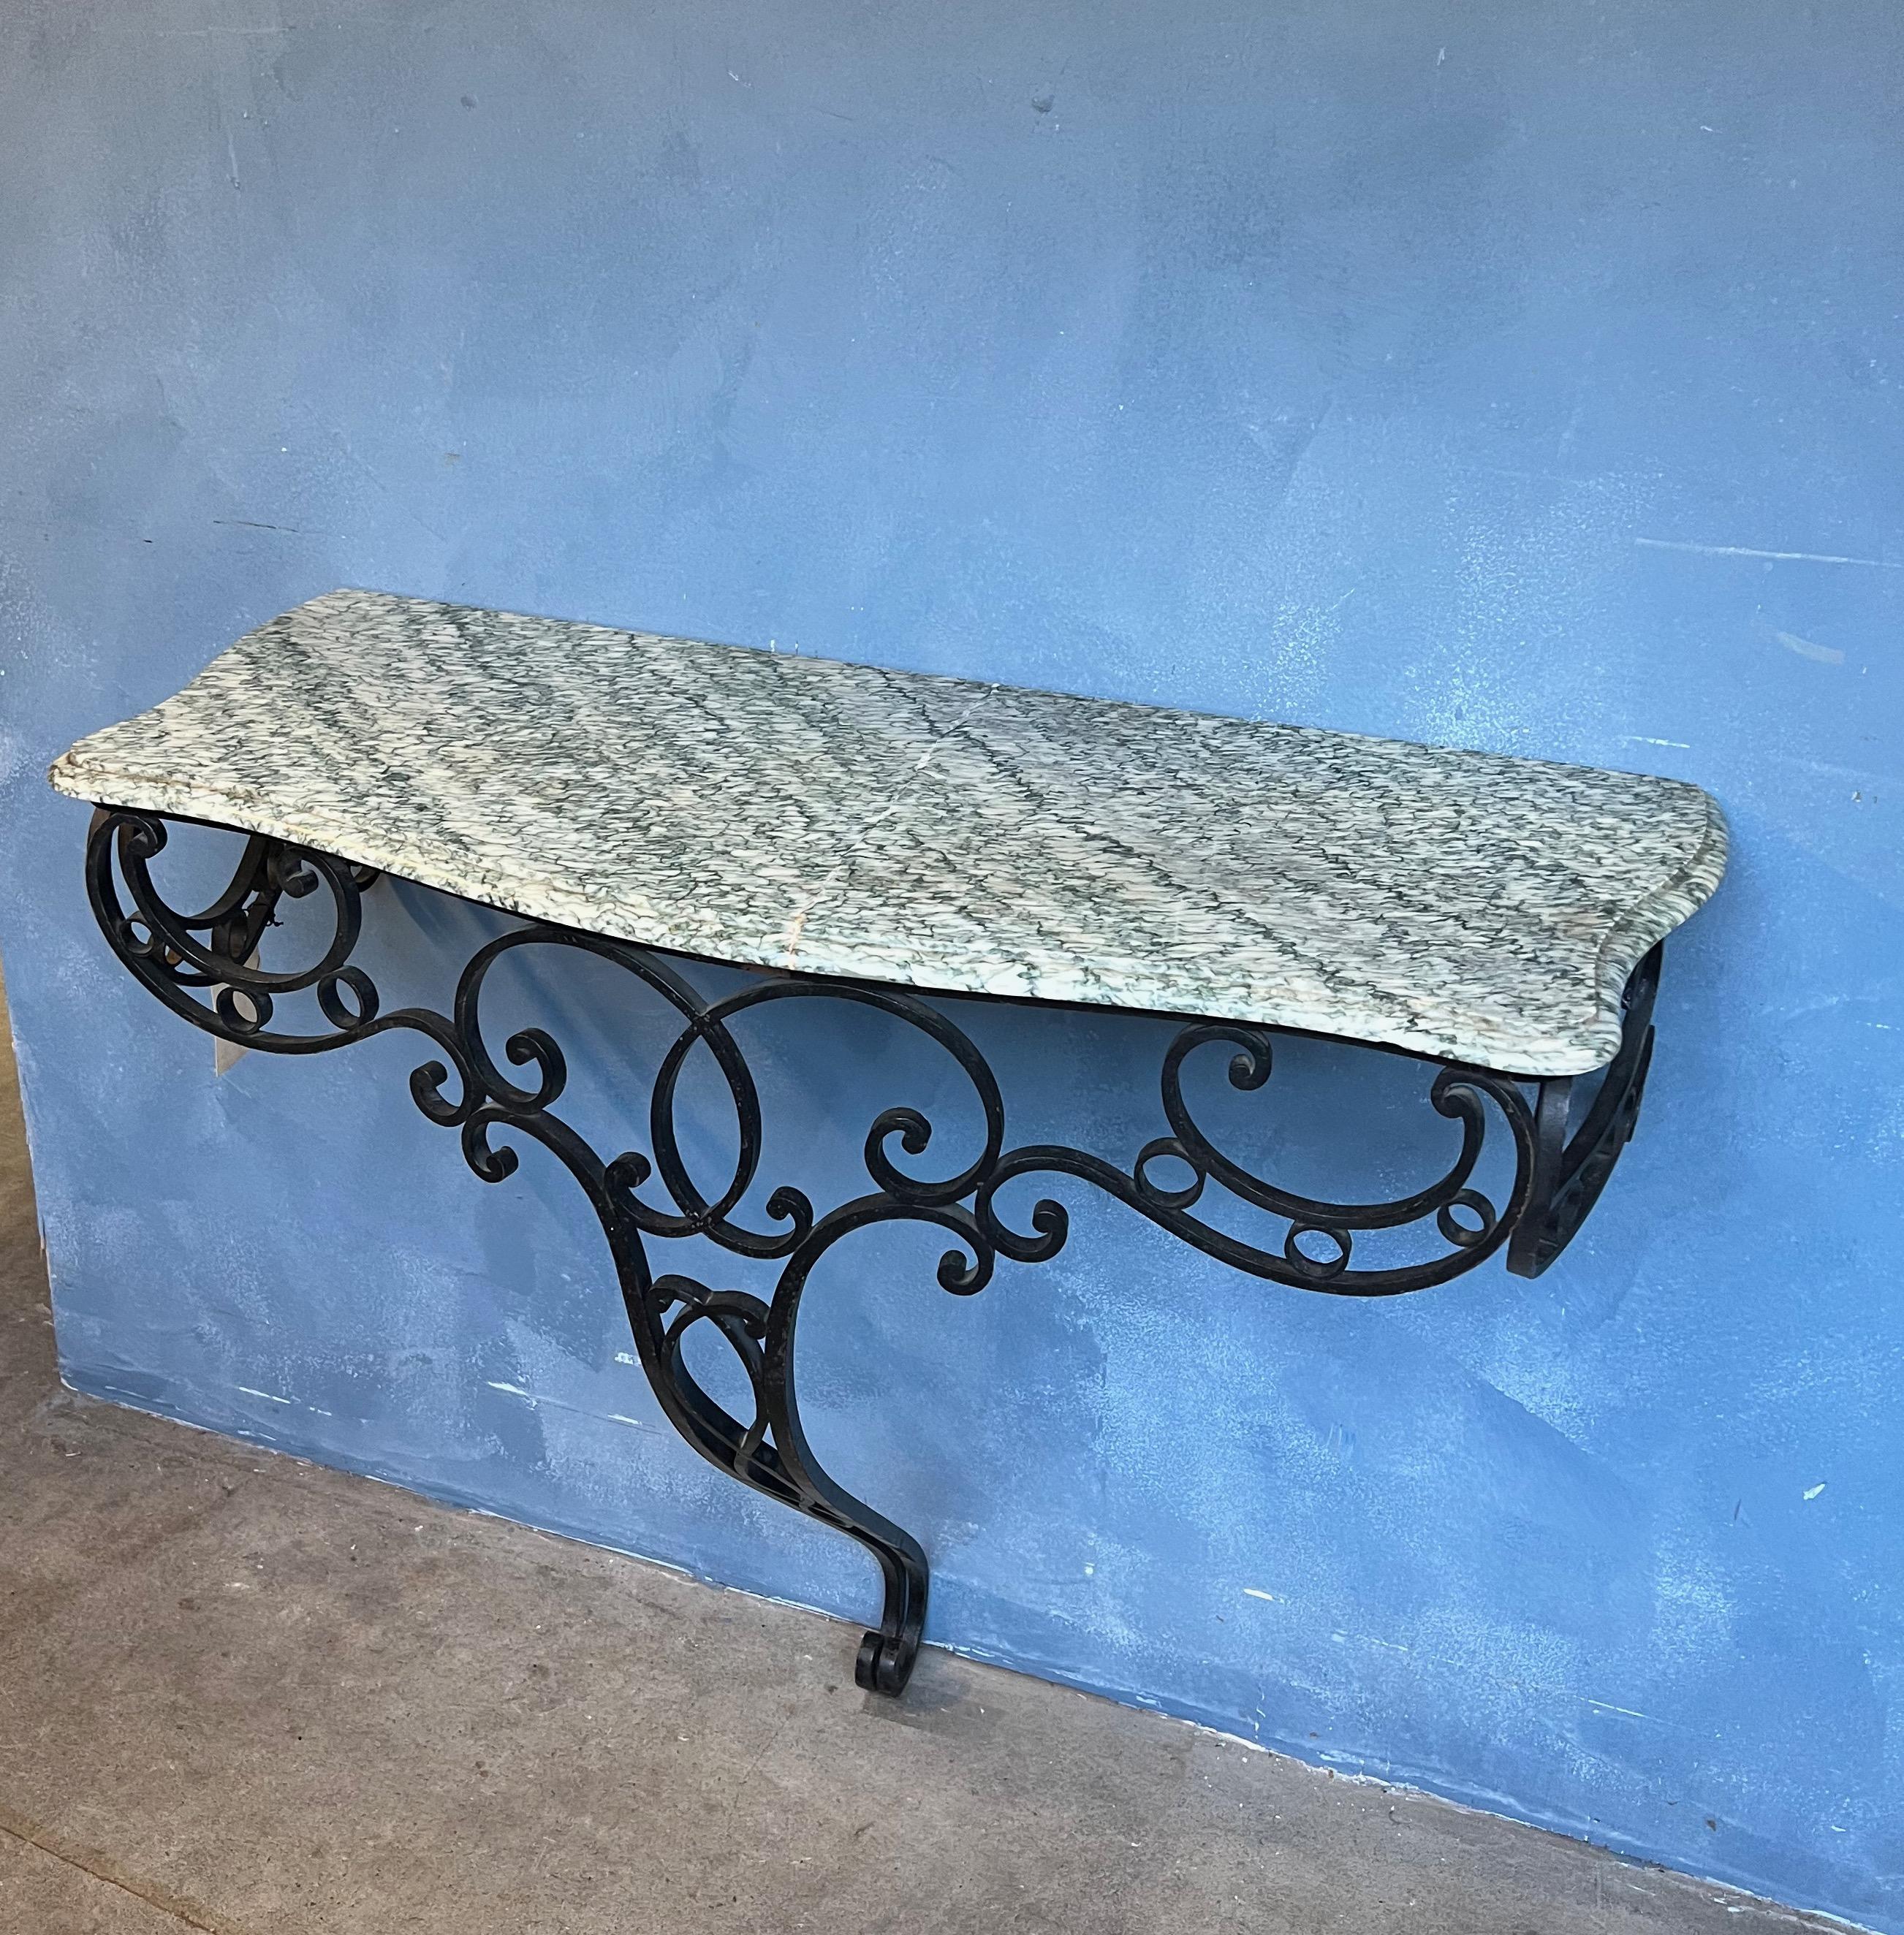 A stunning console from the early 20th century, this French wrought iron piece features an intricately detailed base and ornate rococo styling. This wall-mountable console will add a touch of old world charm to any room it graces, whether it be your